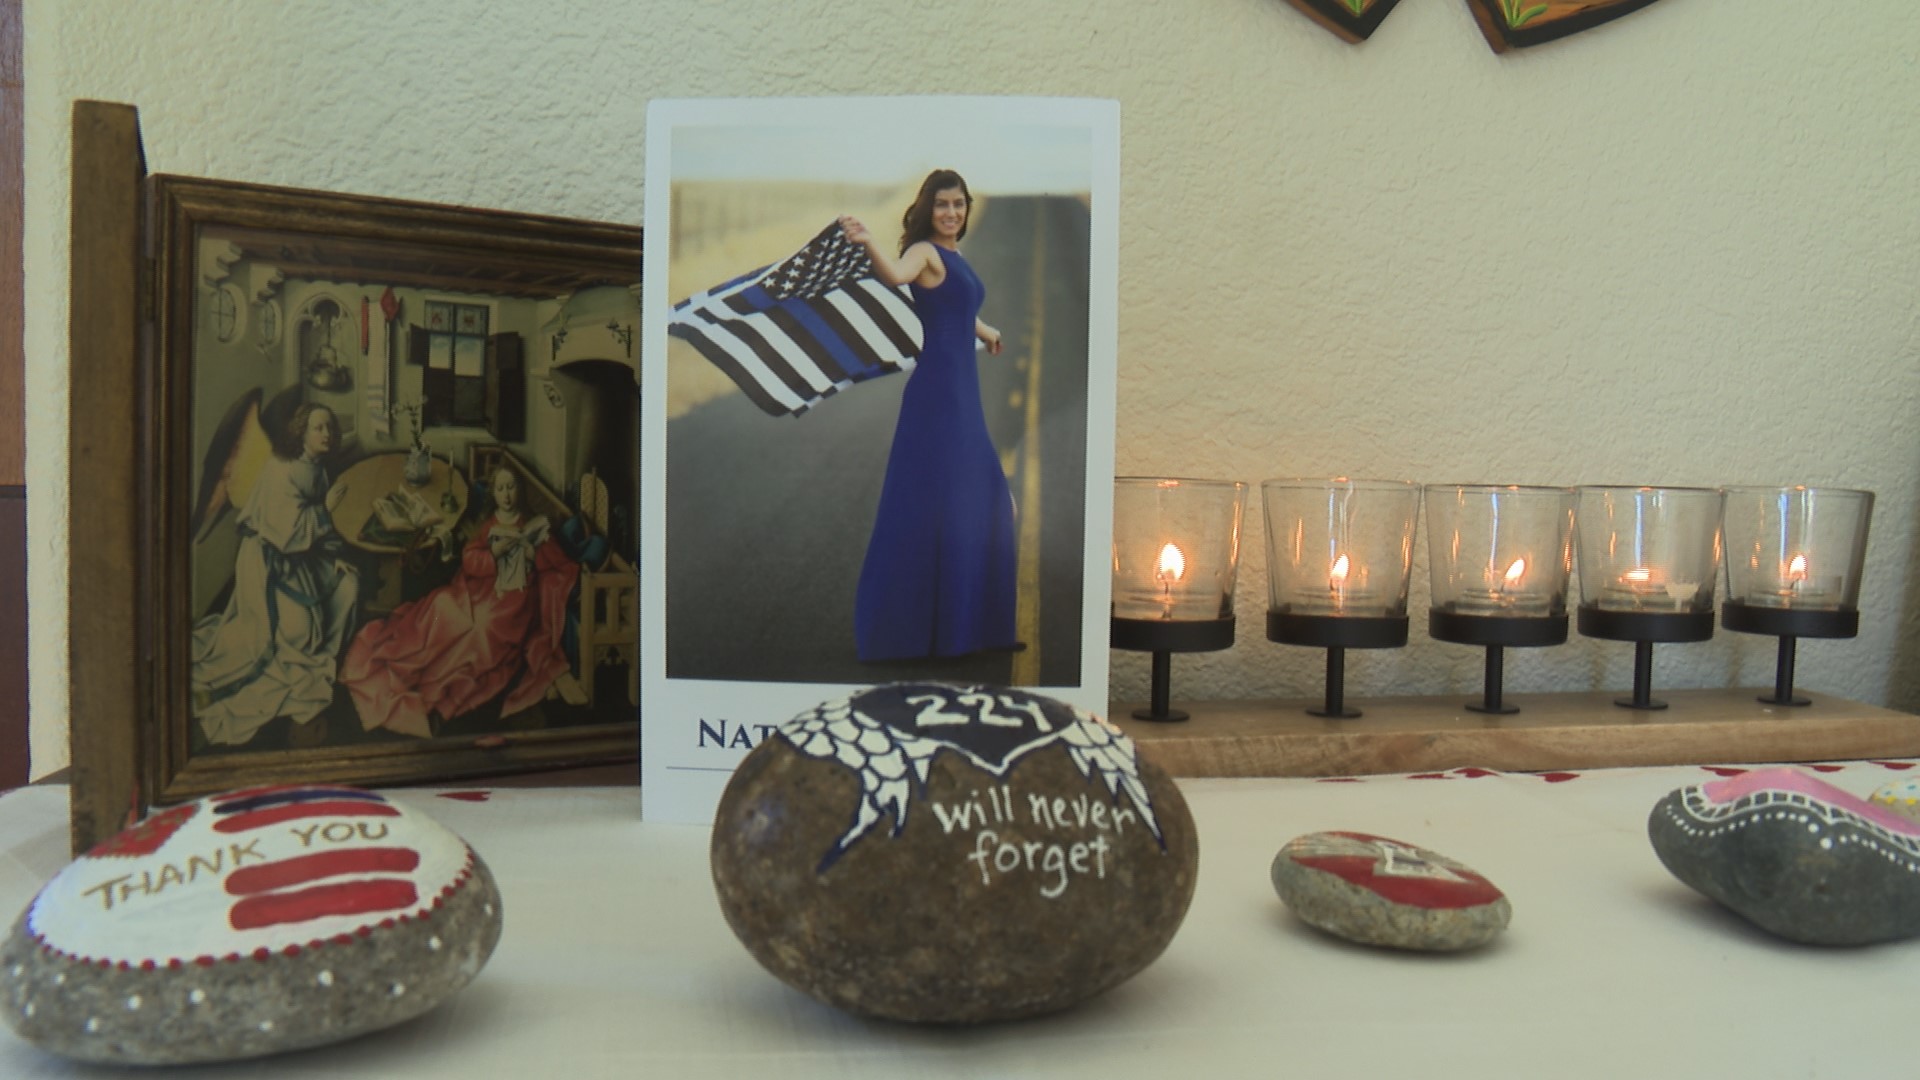 Sunday a Davis woman brought the community together to remember slain Davis Police Officer Natalie Corona. As a way to honor the fallen officer, memorial rocks were painted before they are placed at the police department and around the community.